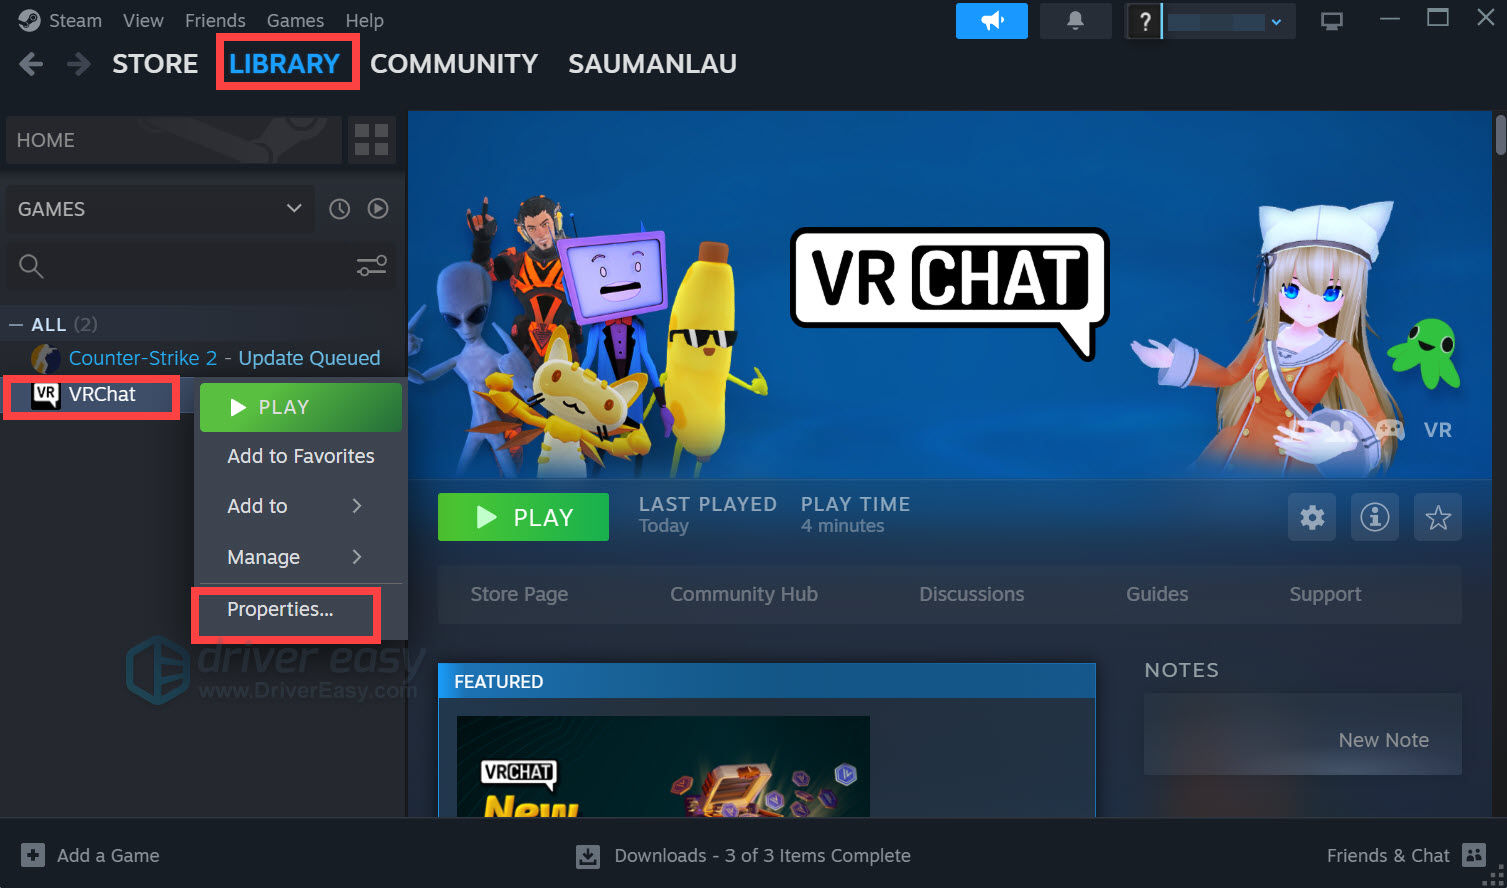 How to Add Friends in VRChat